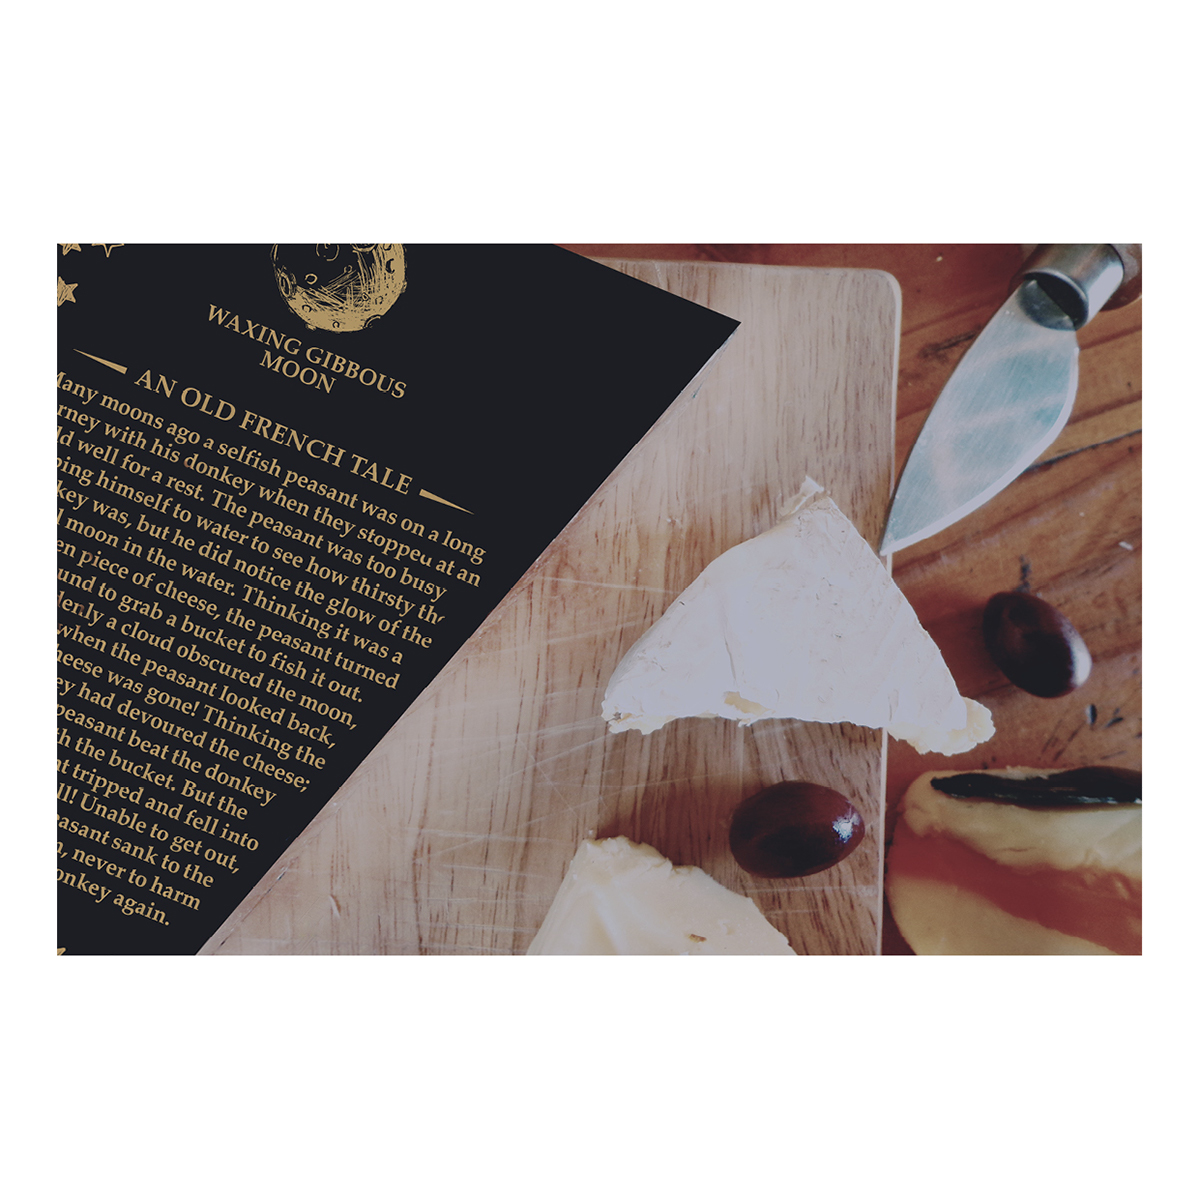 Harvest Moon English Cheese Cheese packaging Saxonshire English Cheese moon illustration moon black and gold packaging design folk tale Cheese platter gold foiling